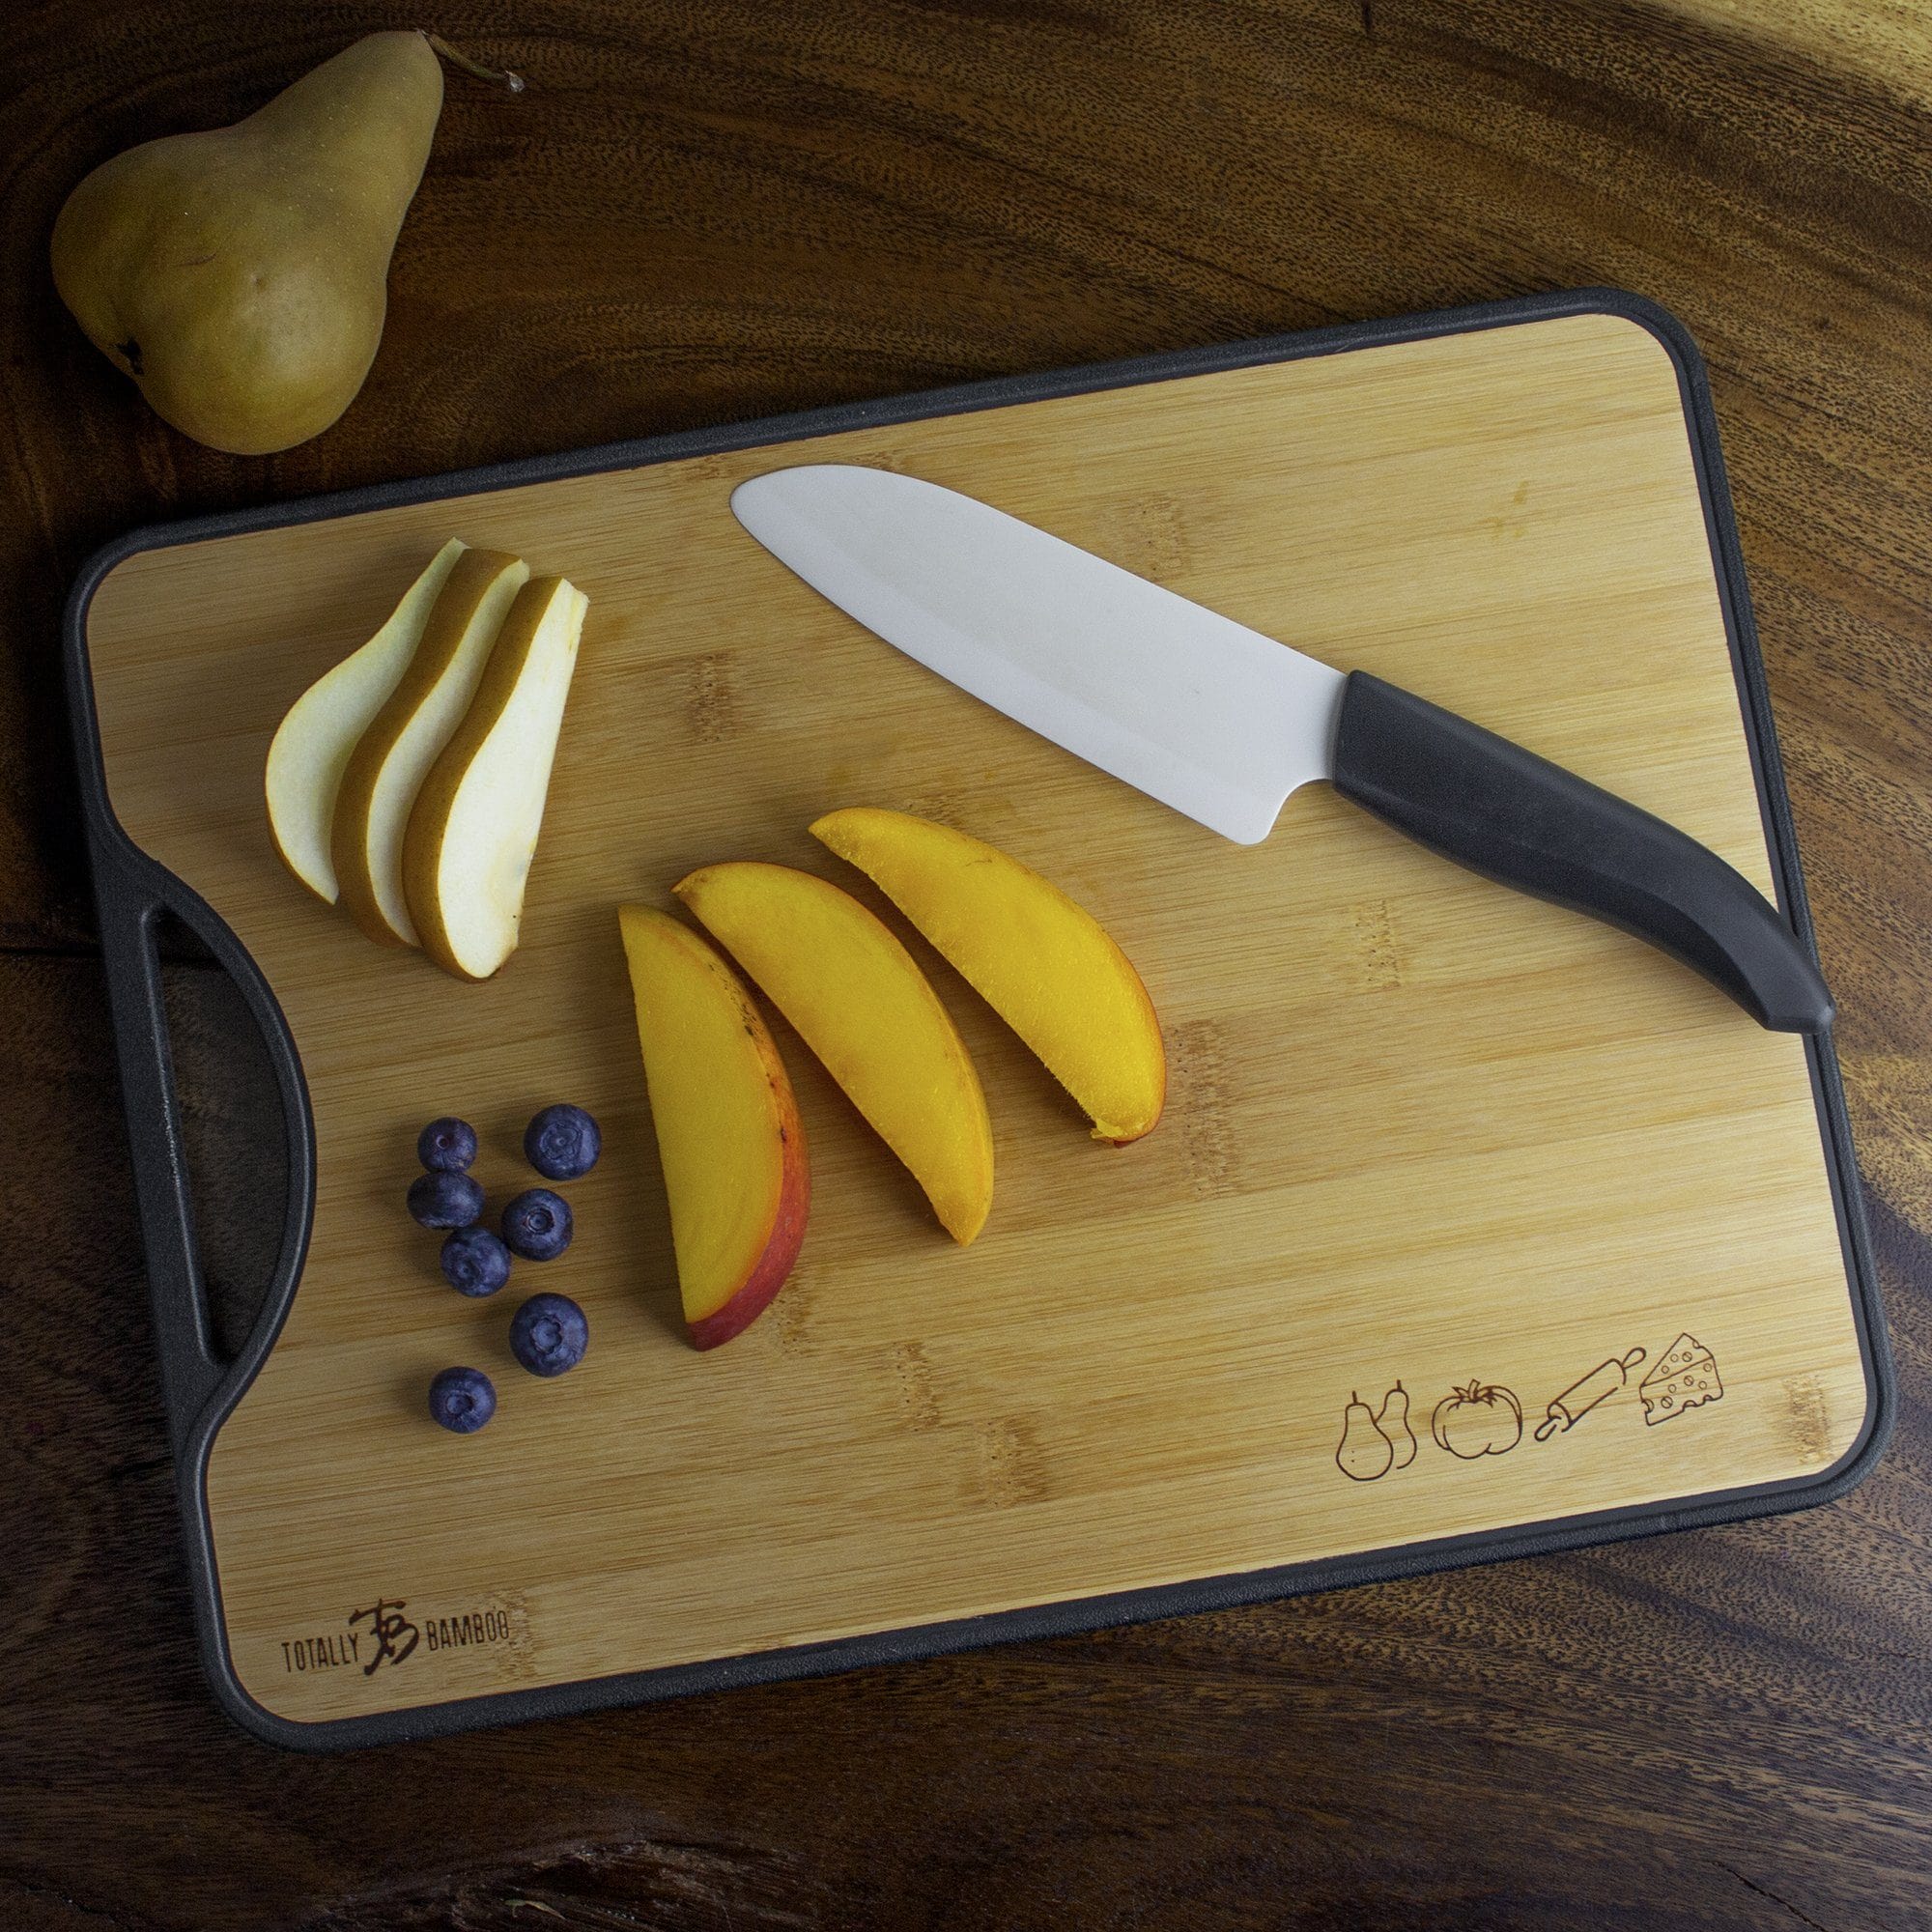 Totally Bamboo Reversible Poly-Boo Cutting Board